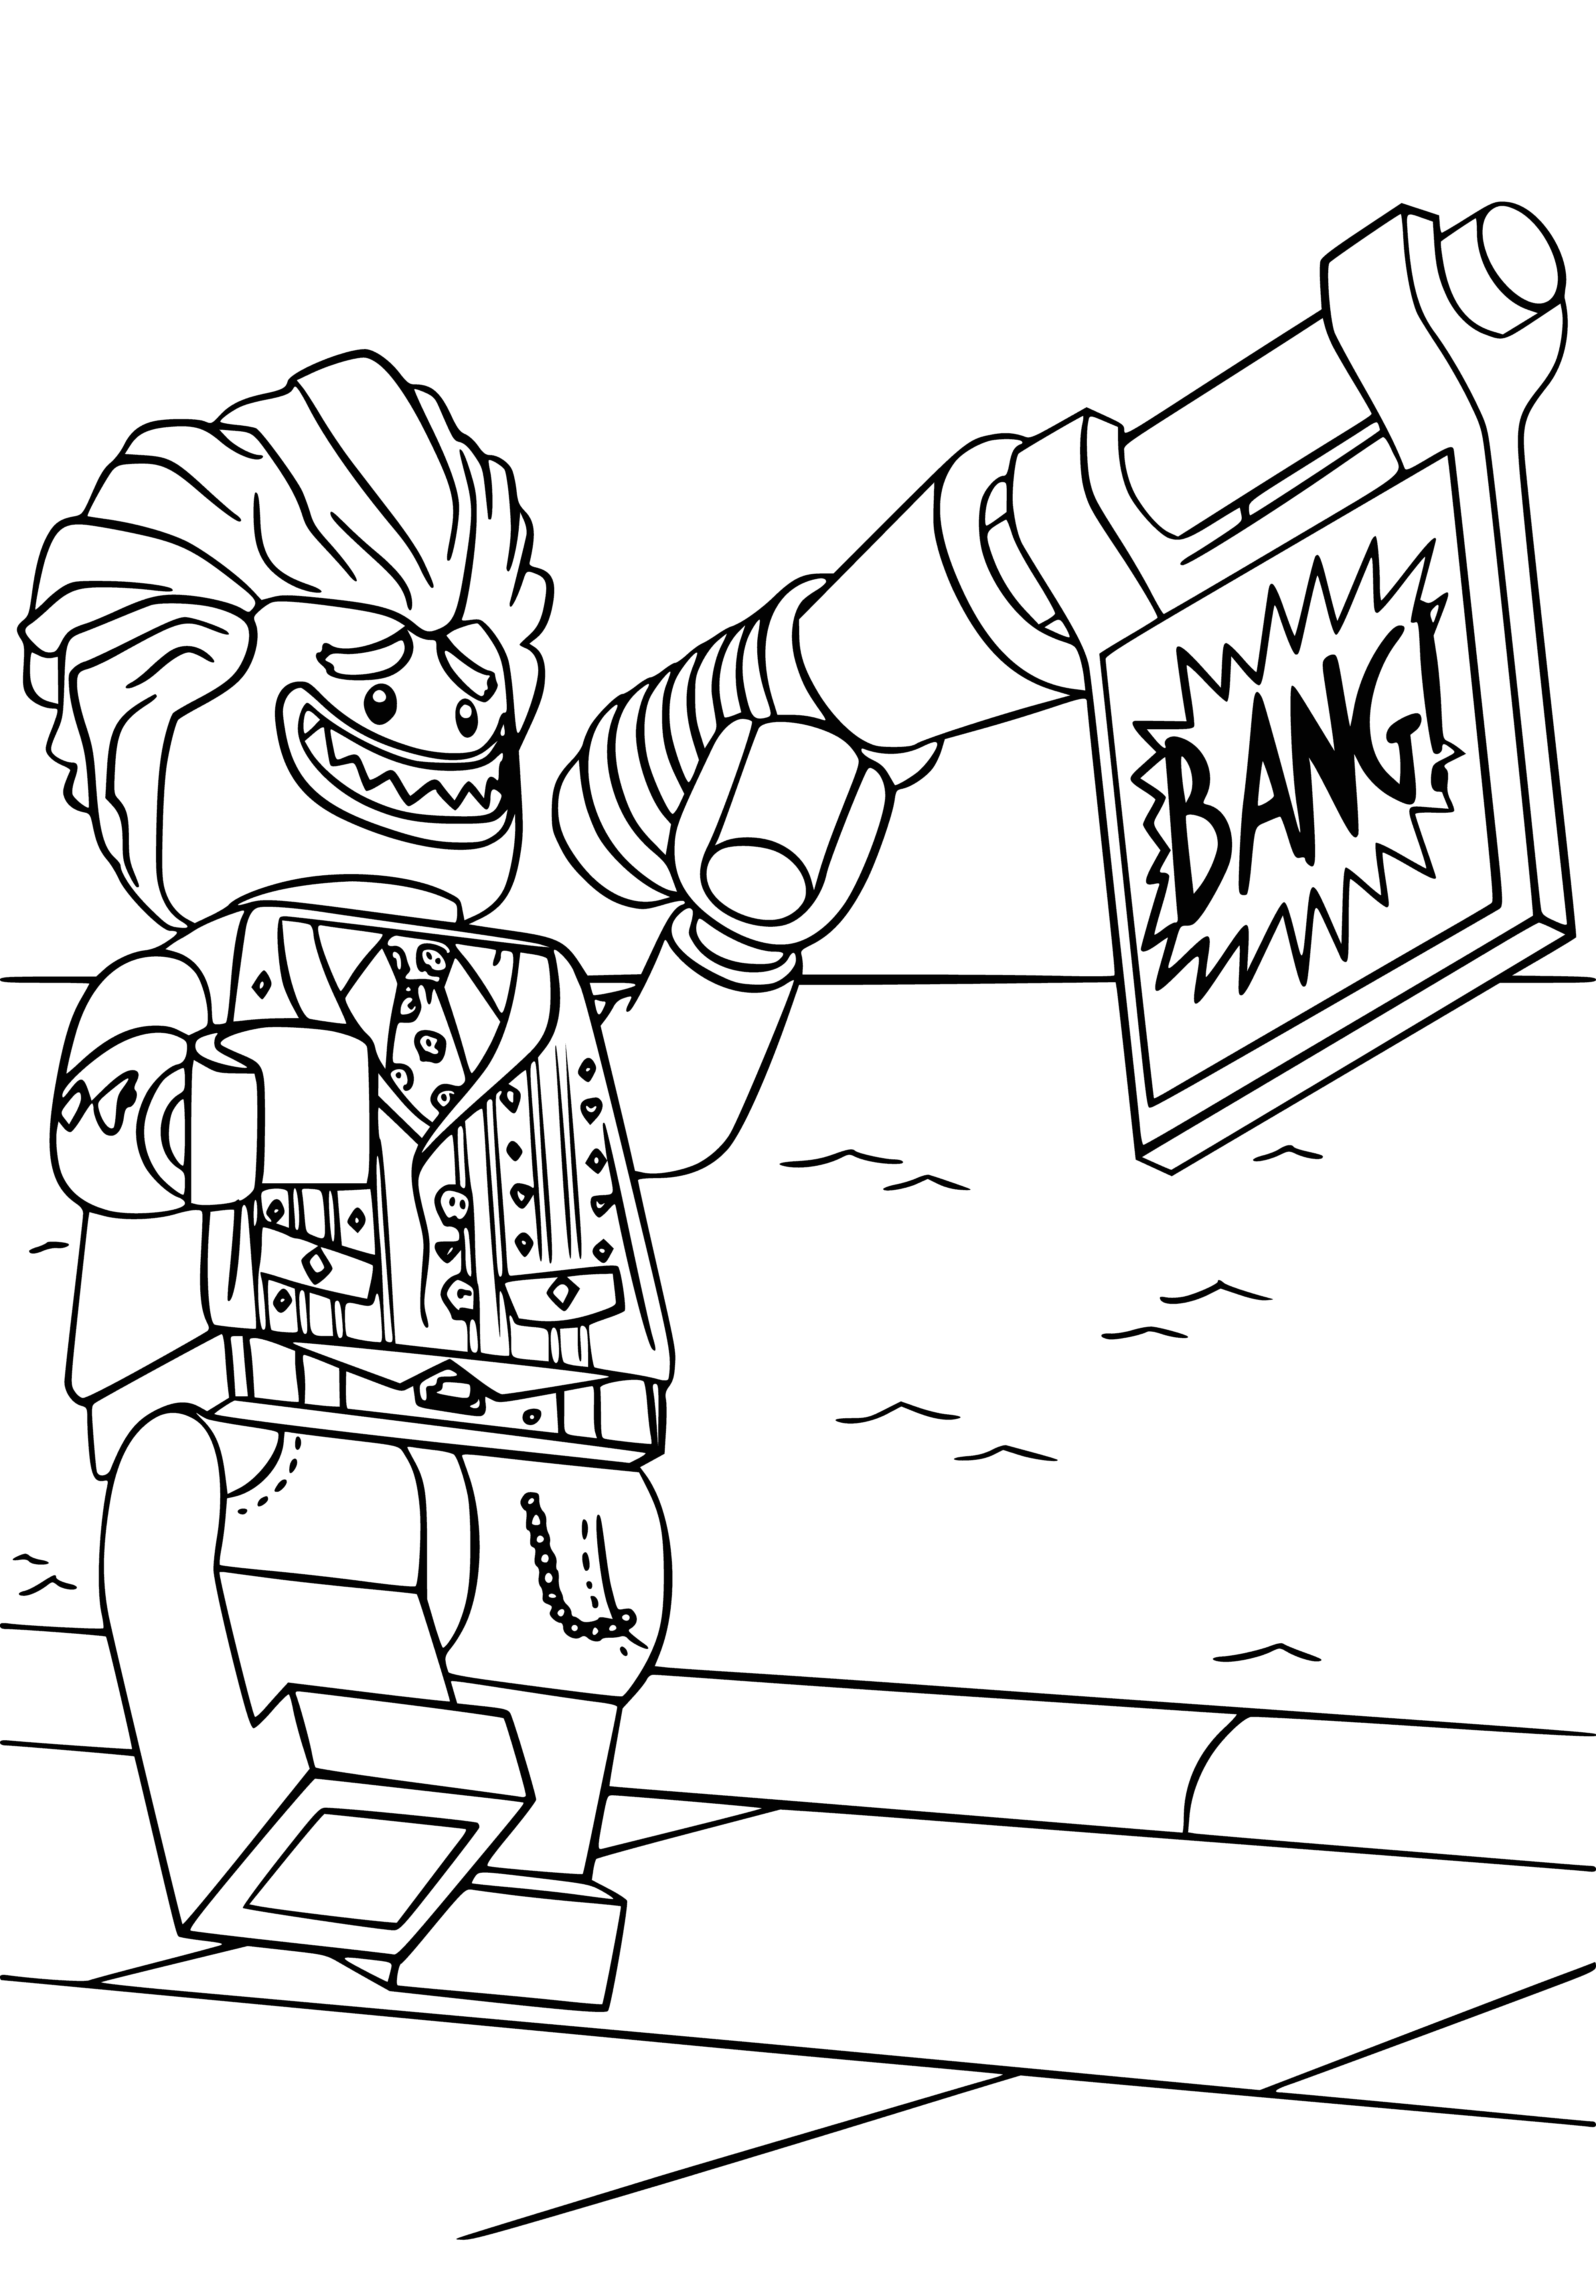 coloring page: The Joker stands with a cannon in front of a green ivy wall, wearing a purple suit, yellow vest, and green tie. Orange hair, white face, and red lips complete the look.